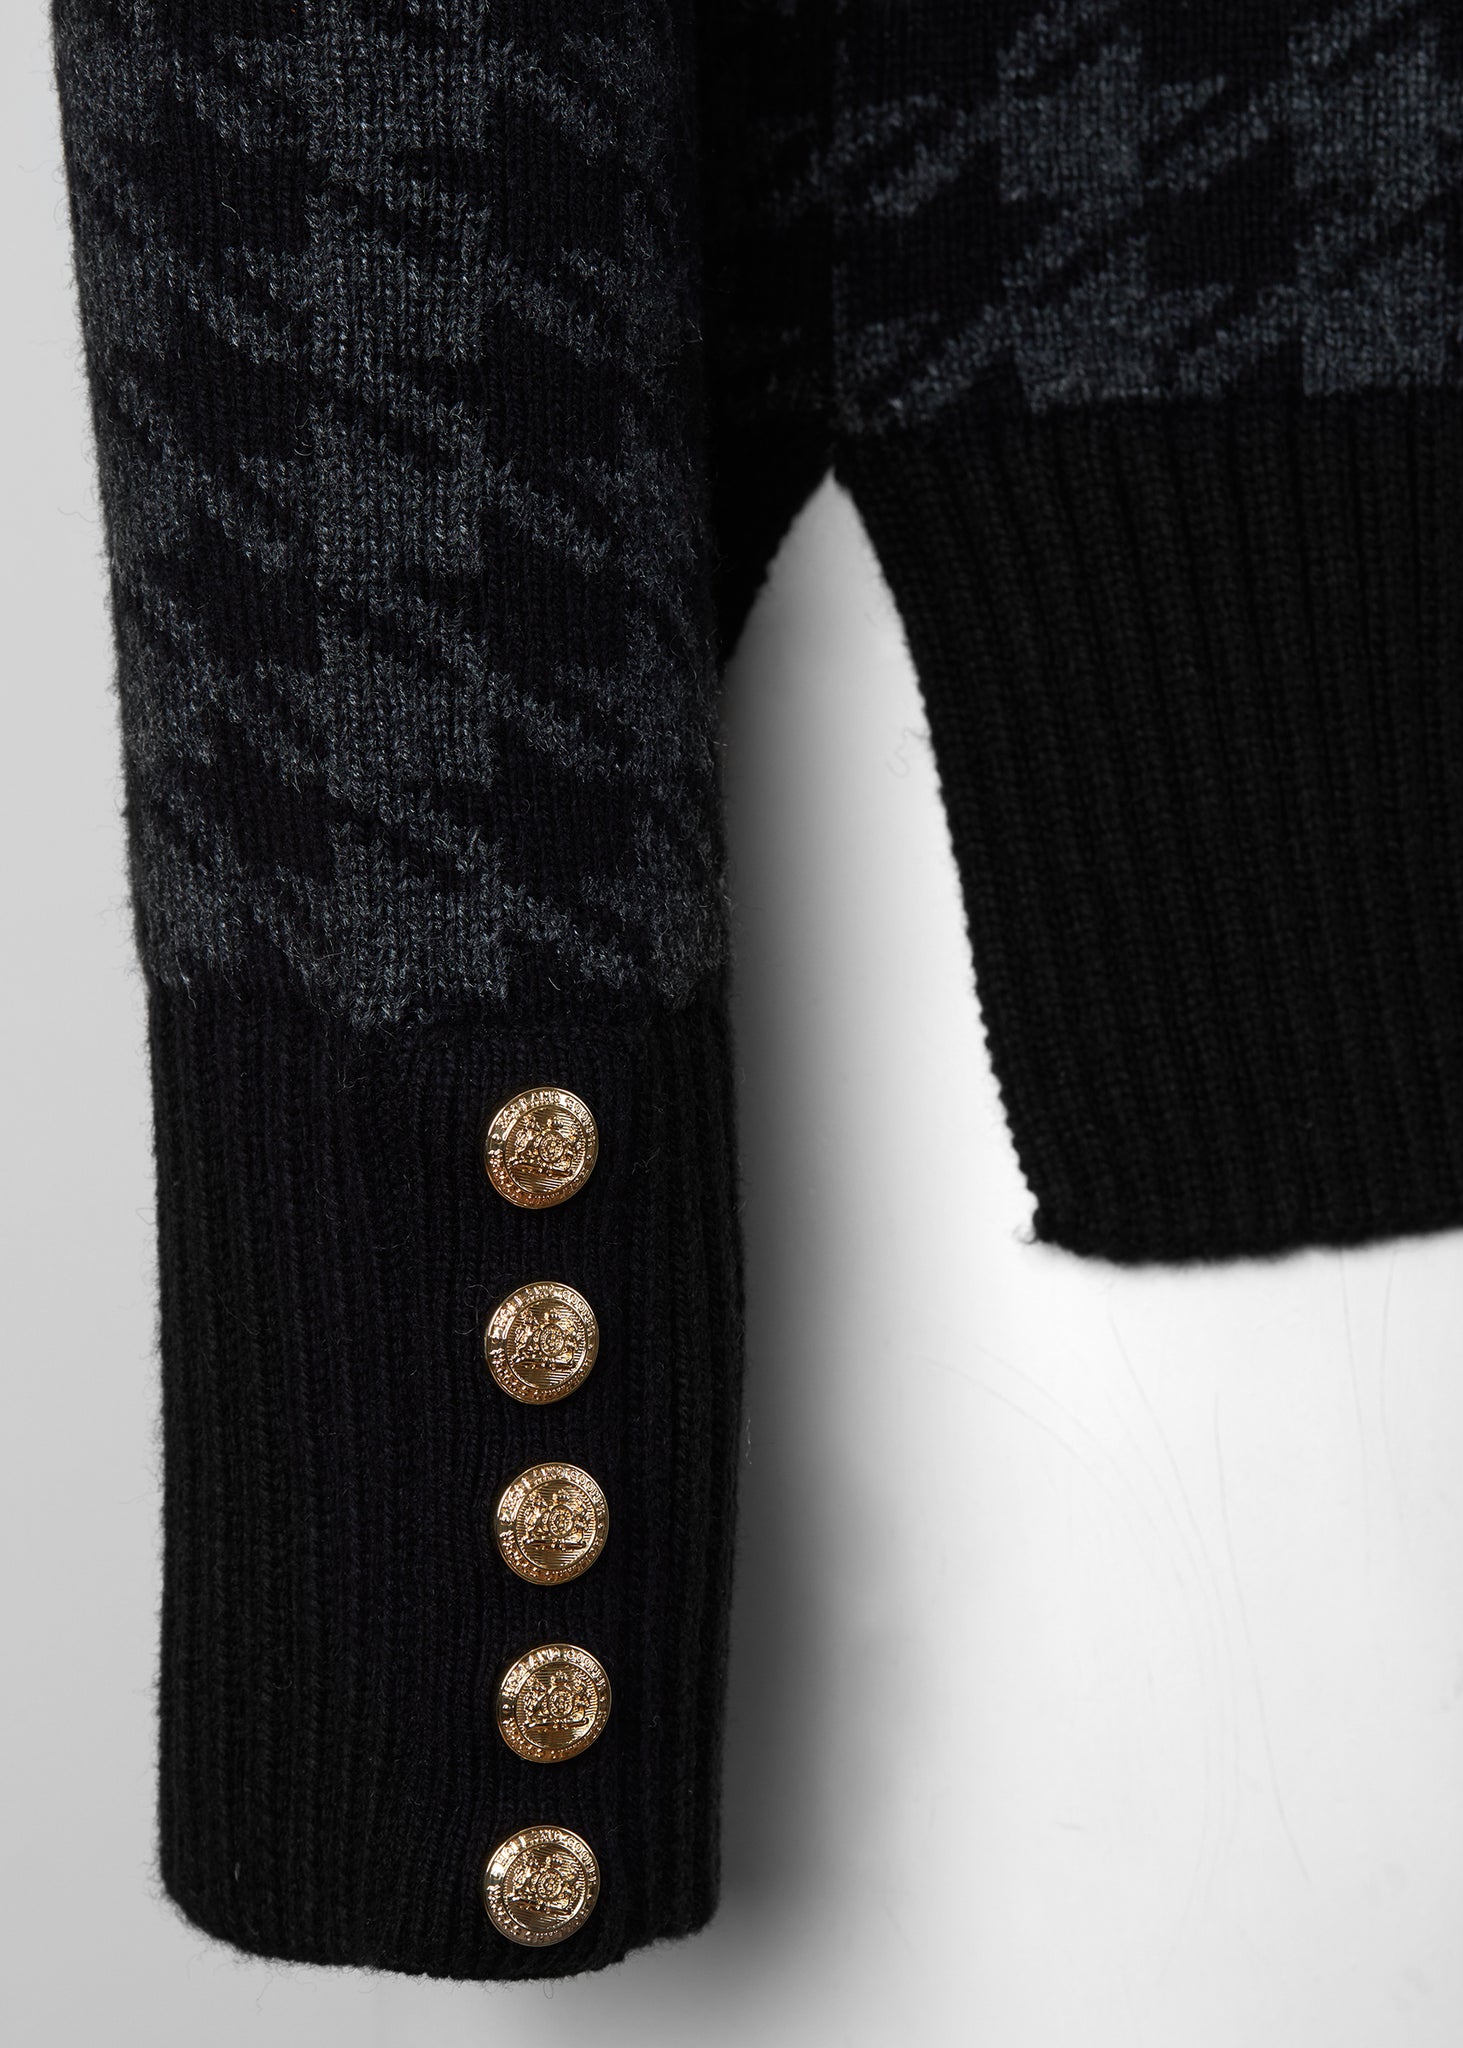 gold button detail on cuffs of a classic black and grey houndstooth jumper with contrast black cuffs, roll neck and split ribbed hem with gold button detail on the cuffs and collar